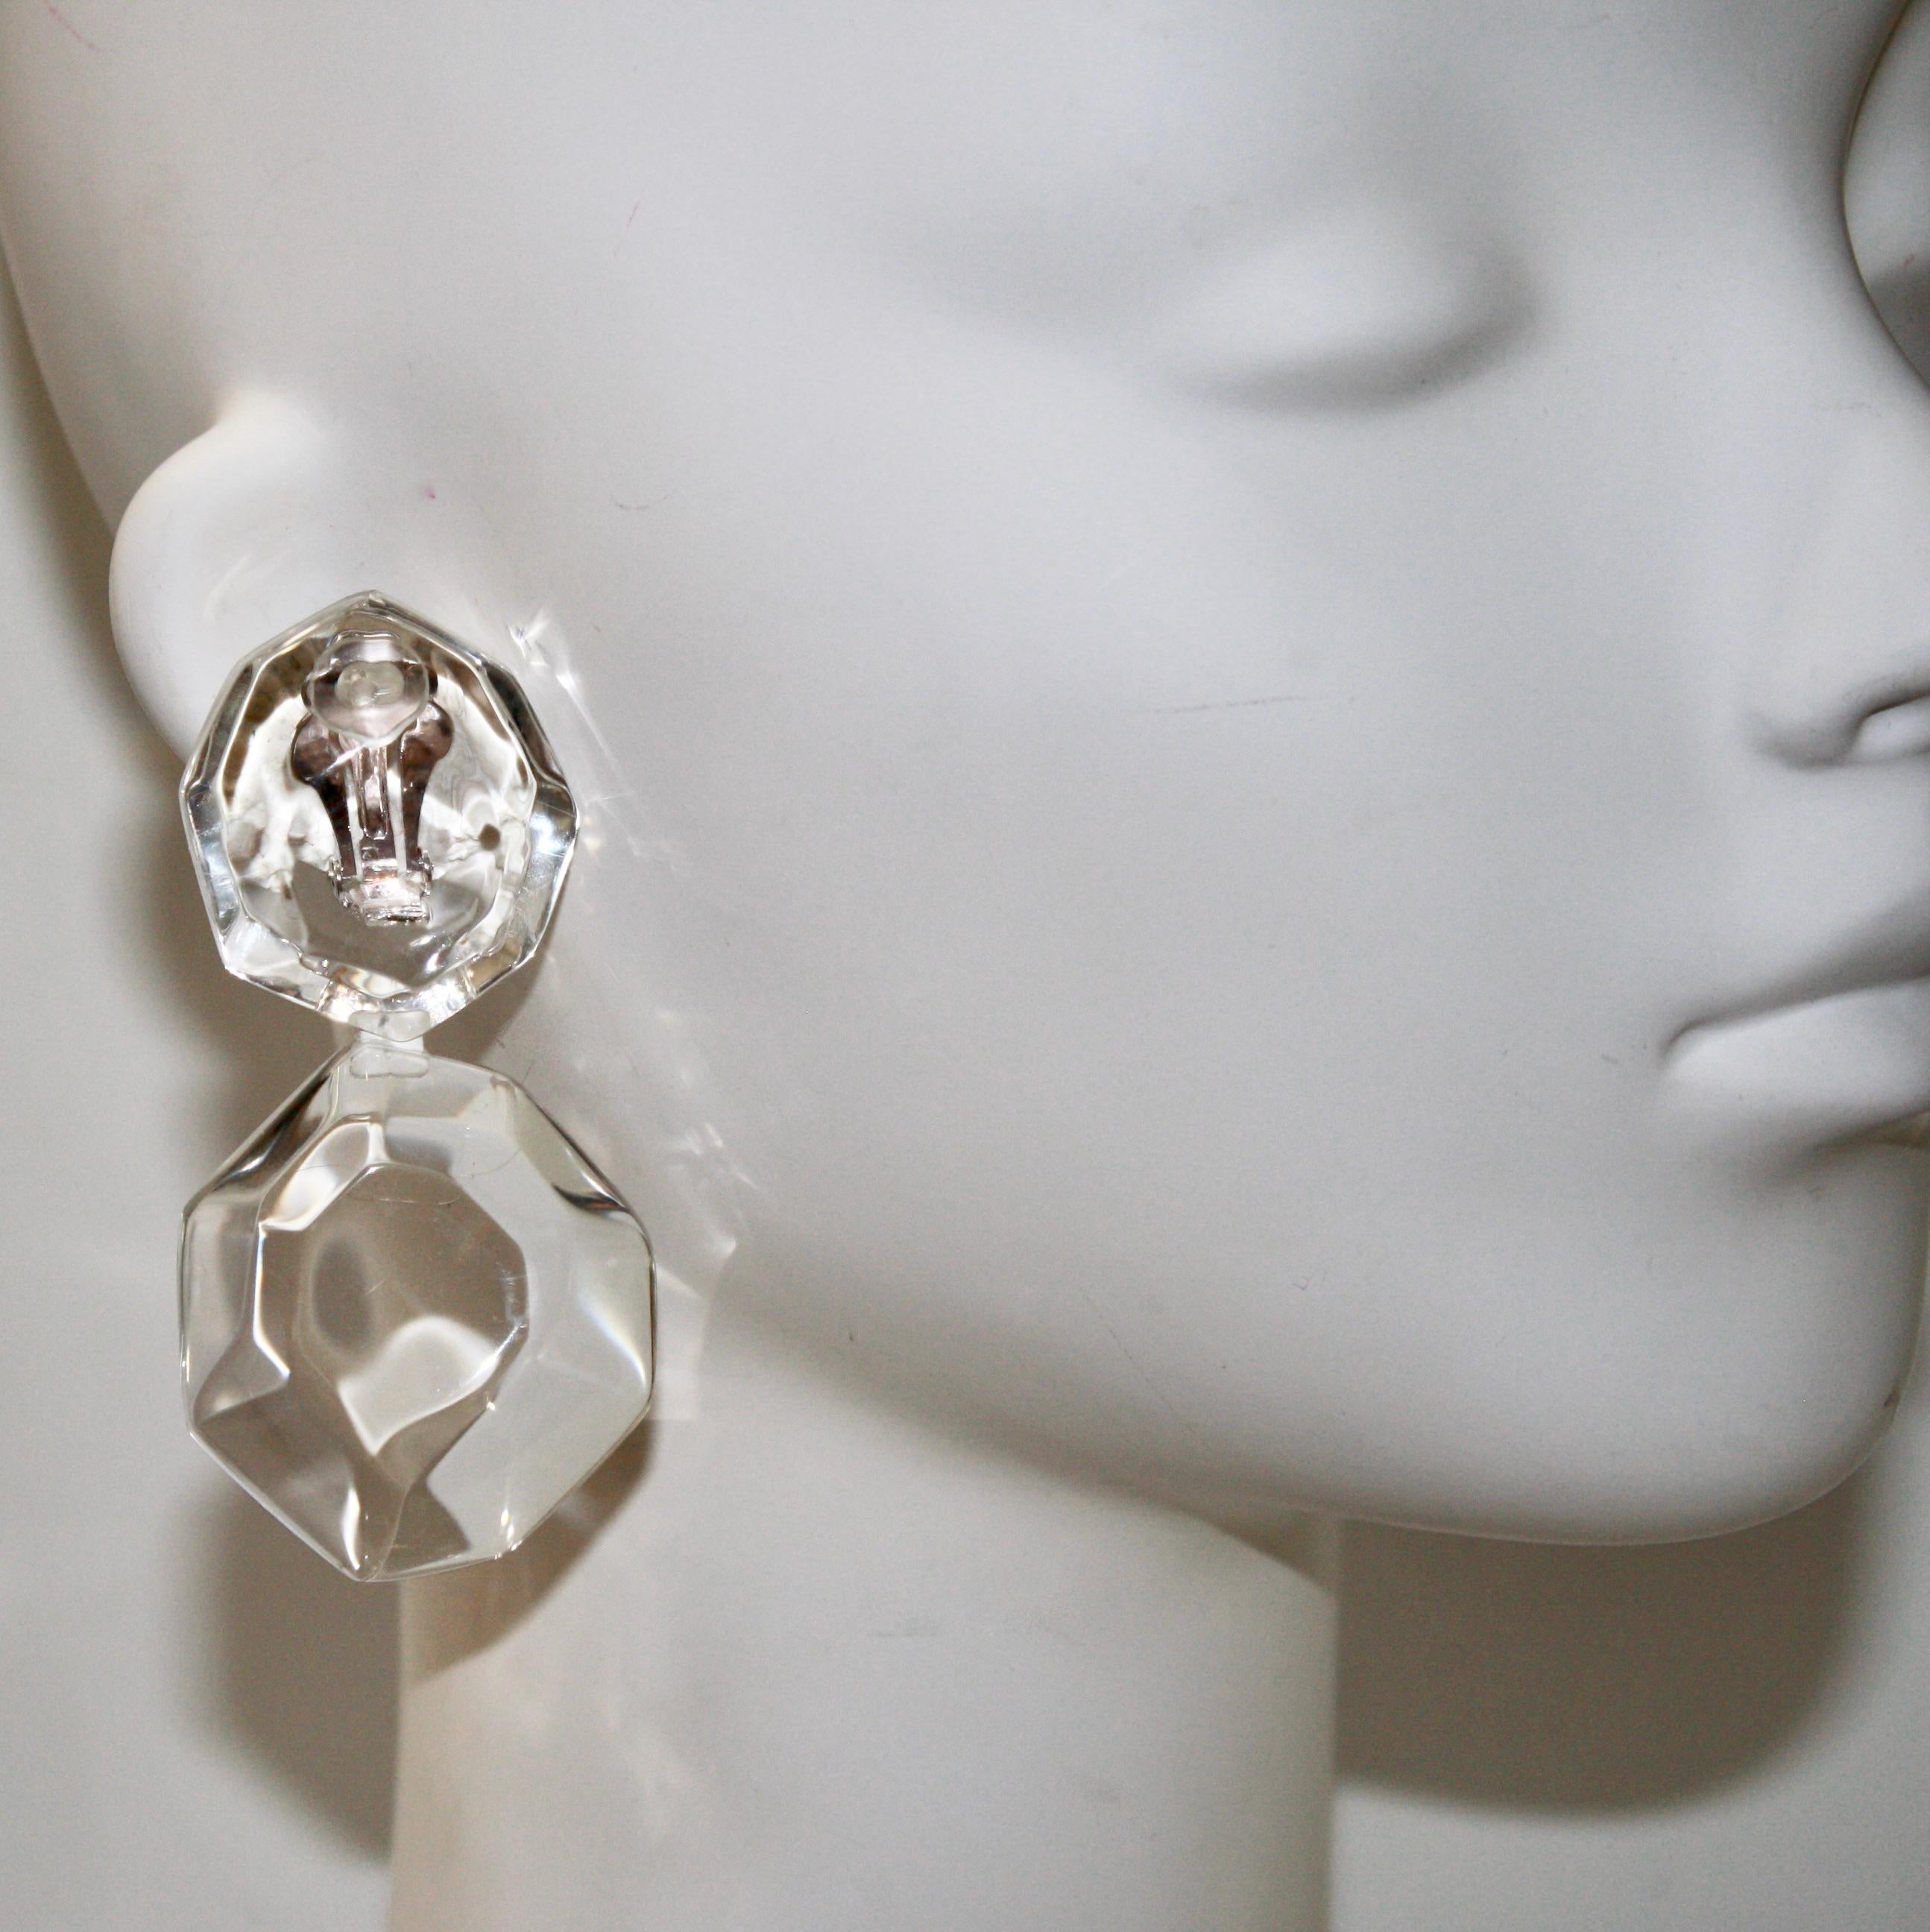 Clip earrings with oversized faceted acrylic elements. Signature on clasp.